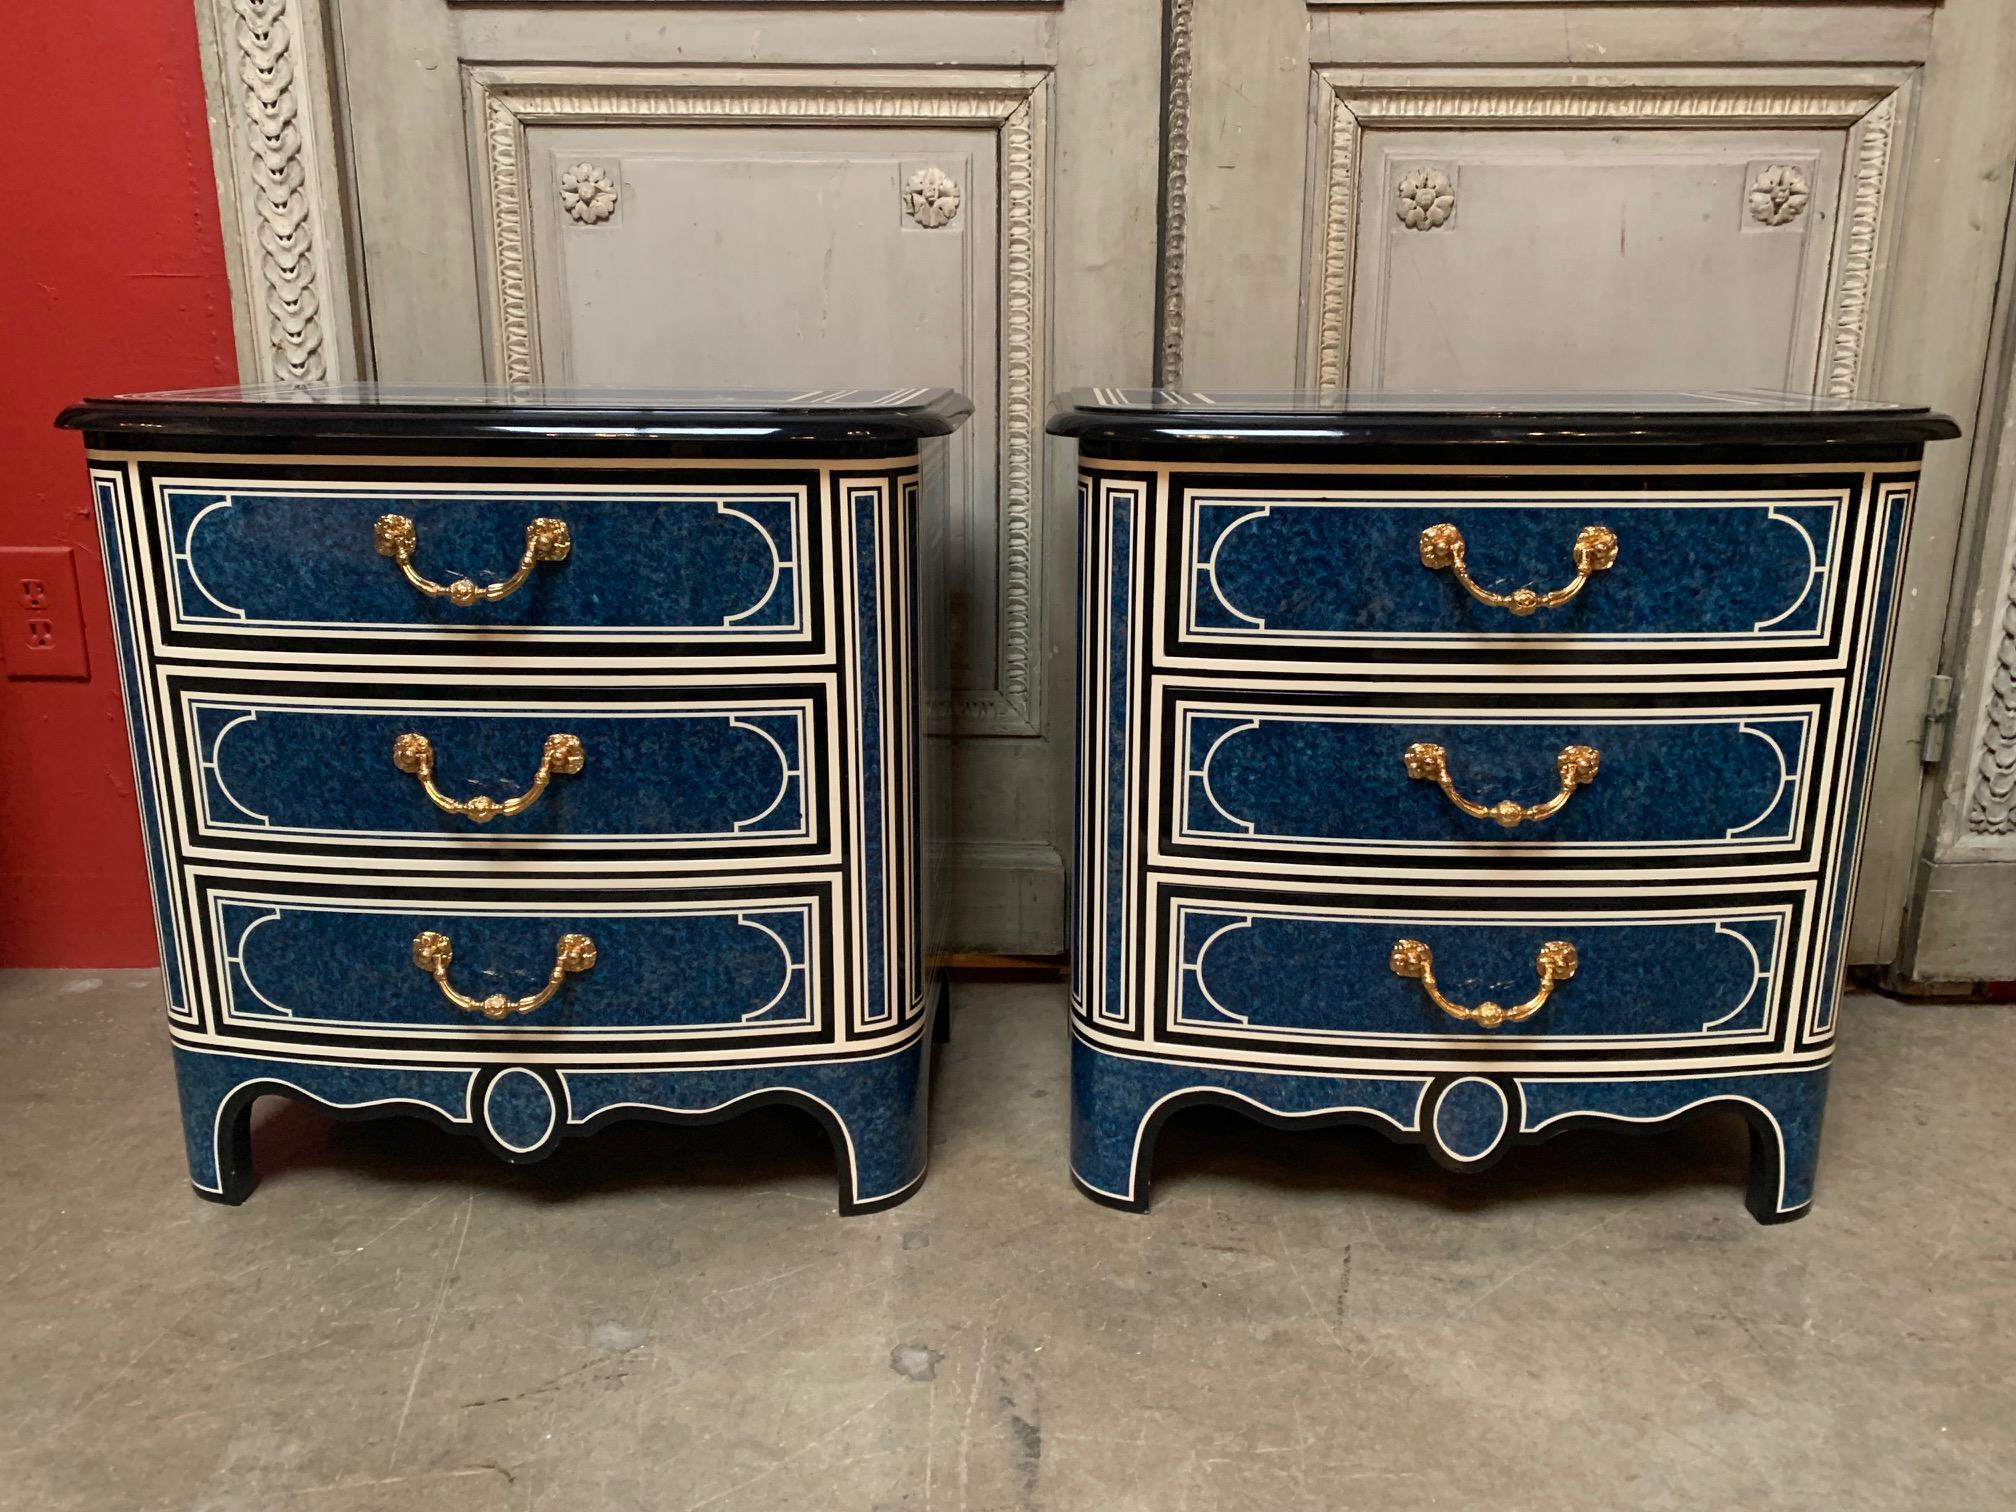 A pair of French painted and lacqured chest of drawers in the Regence style, with a blue white and black finish and gilt broze hardware. These stylish commodes were made in Paris in the 1980s. They will be great night stands or flanking a sofa.